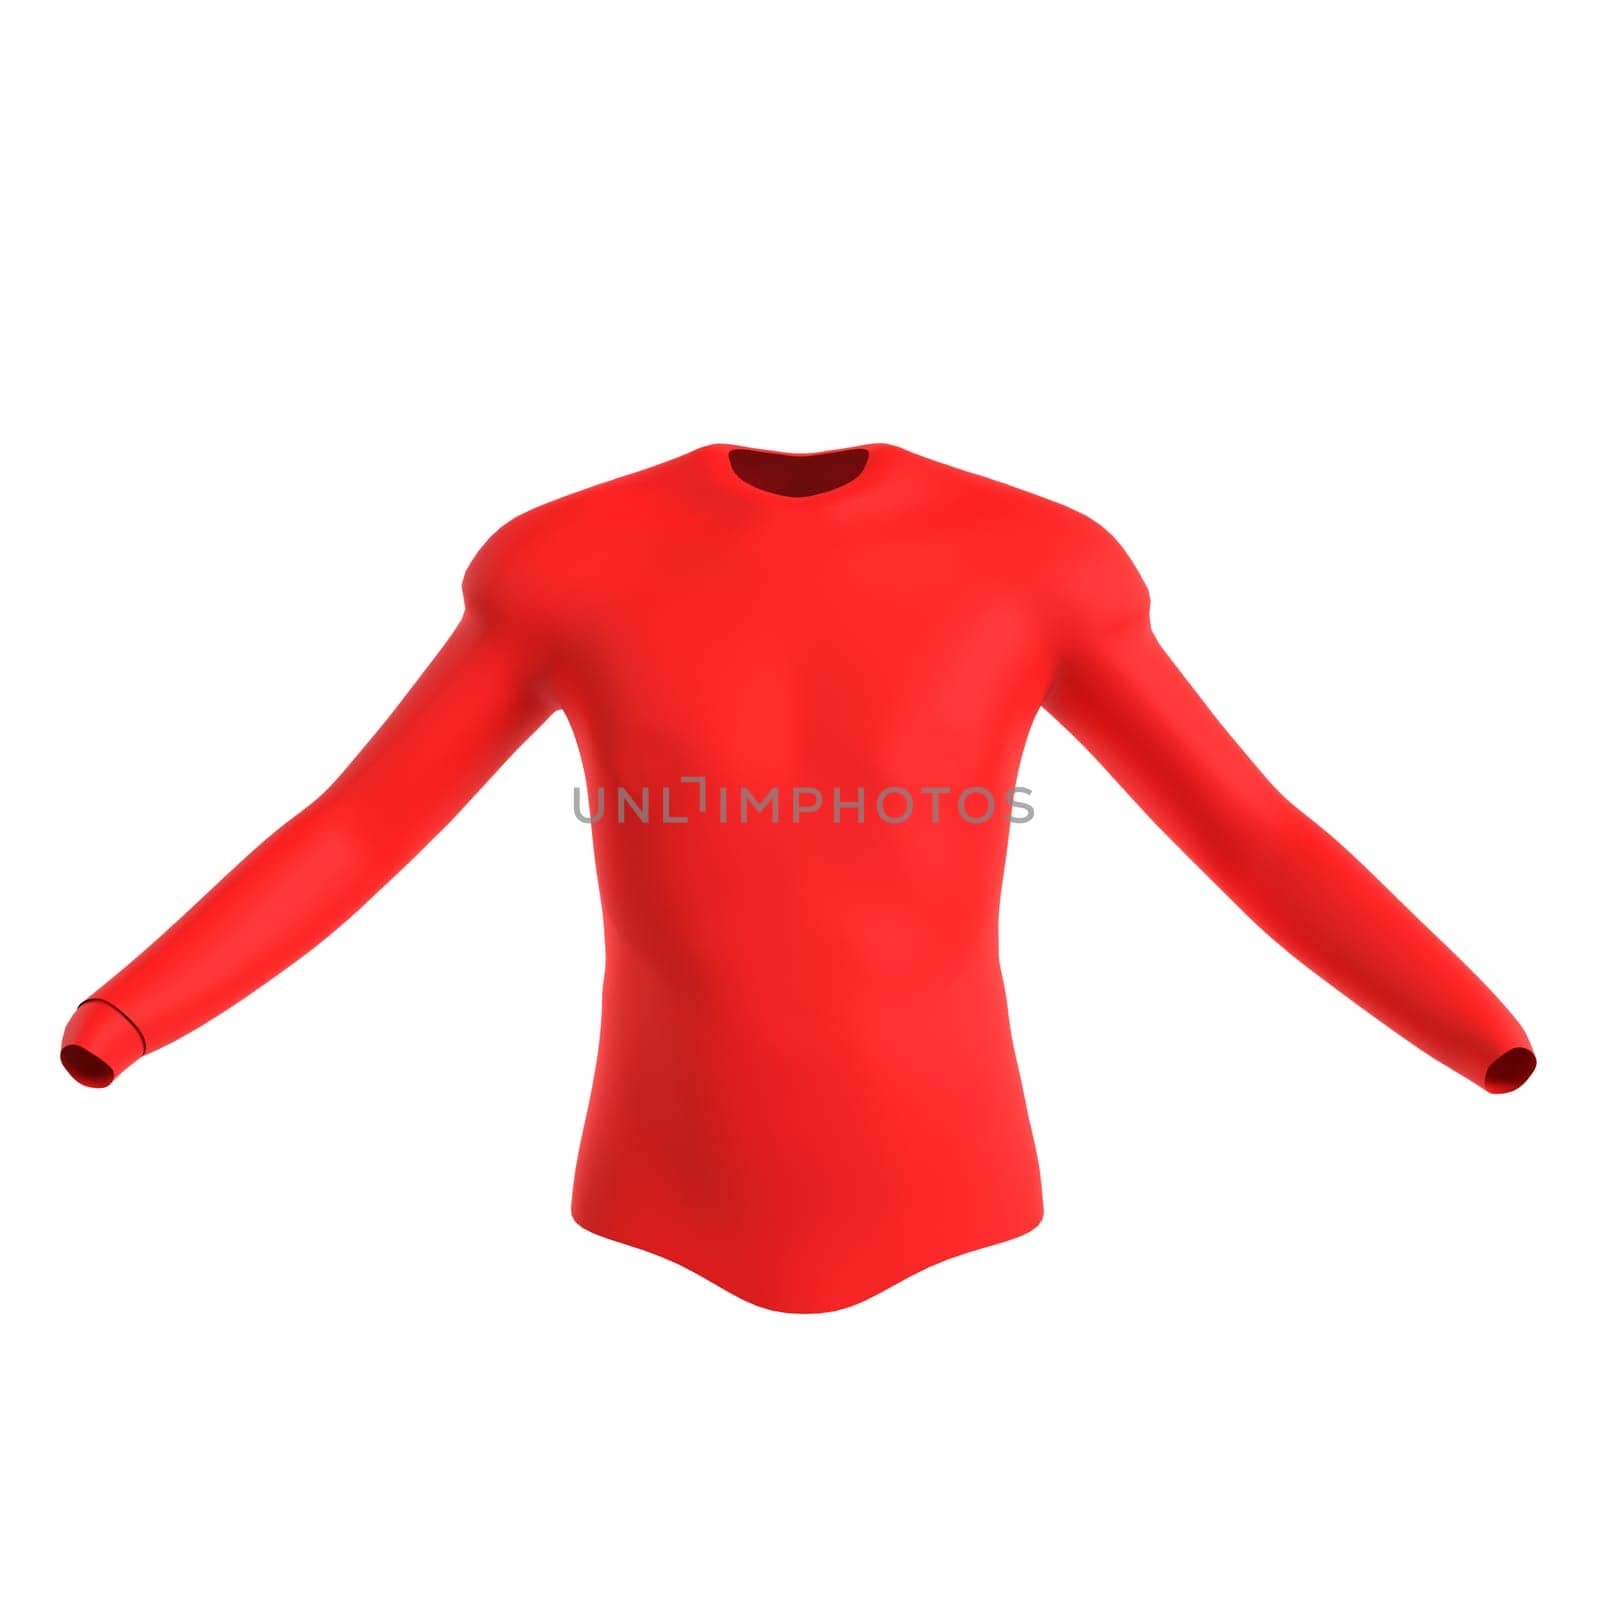 Red Shirt isolated on white background. High quality 3d illustration